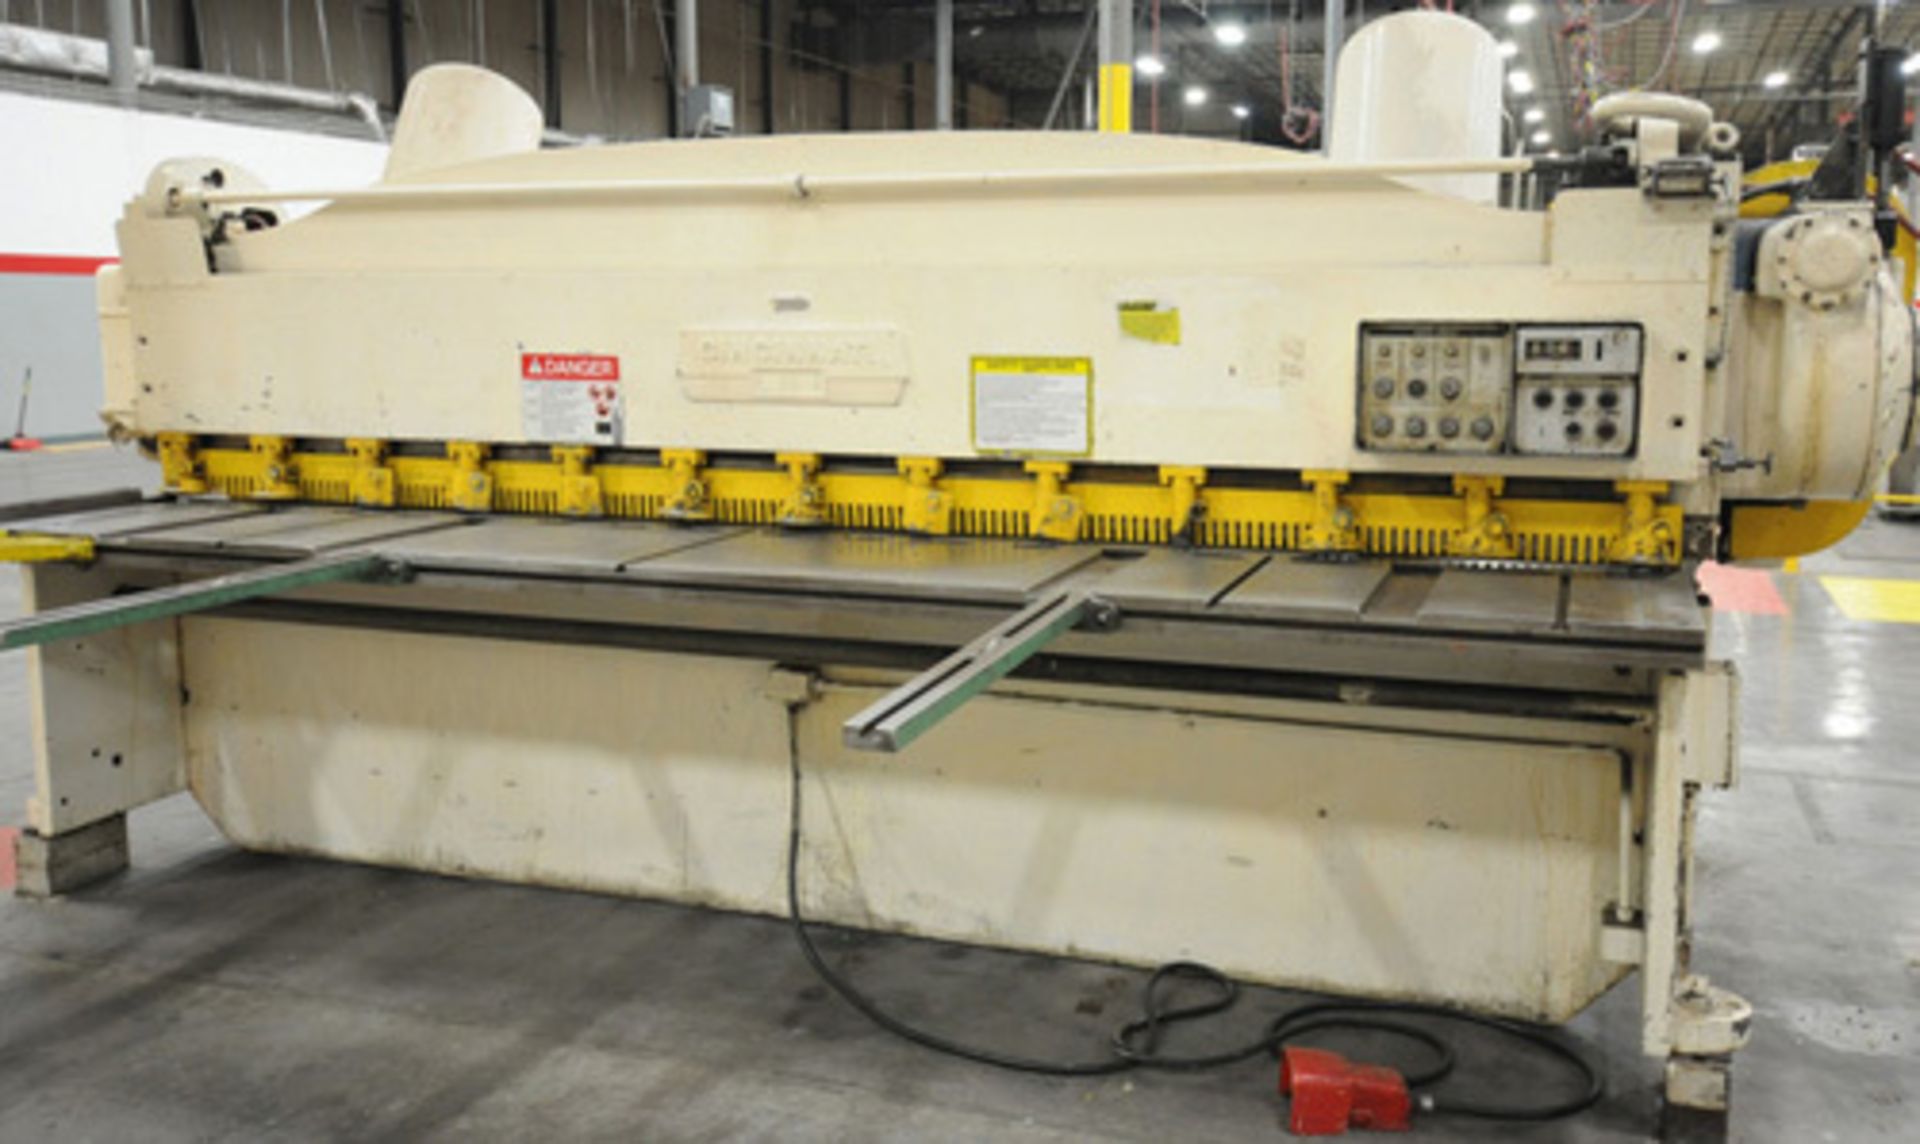 Cincinnati Power Shear, 1/4" x 12', Mdl: 1812, S/N: 36327 (8035P) (Located In Painesville, OH)